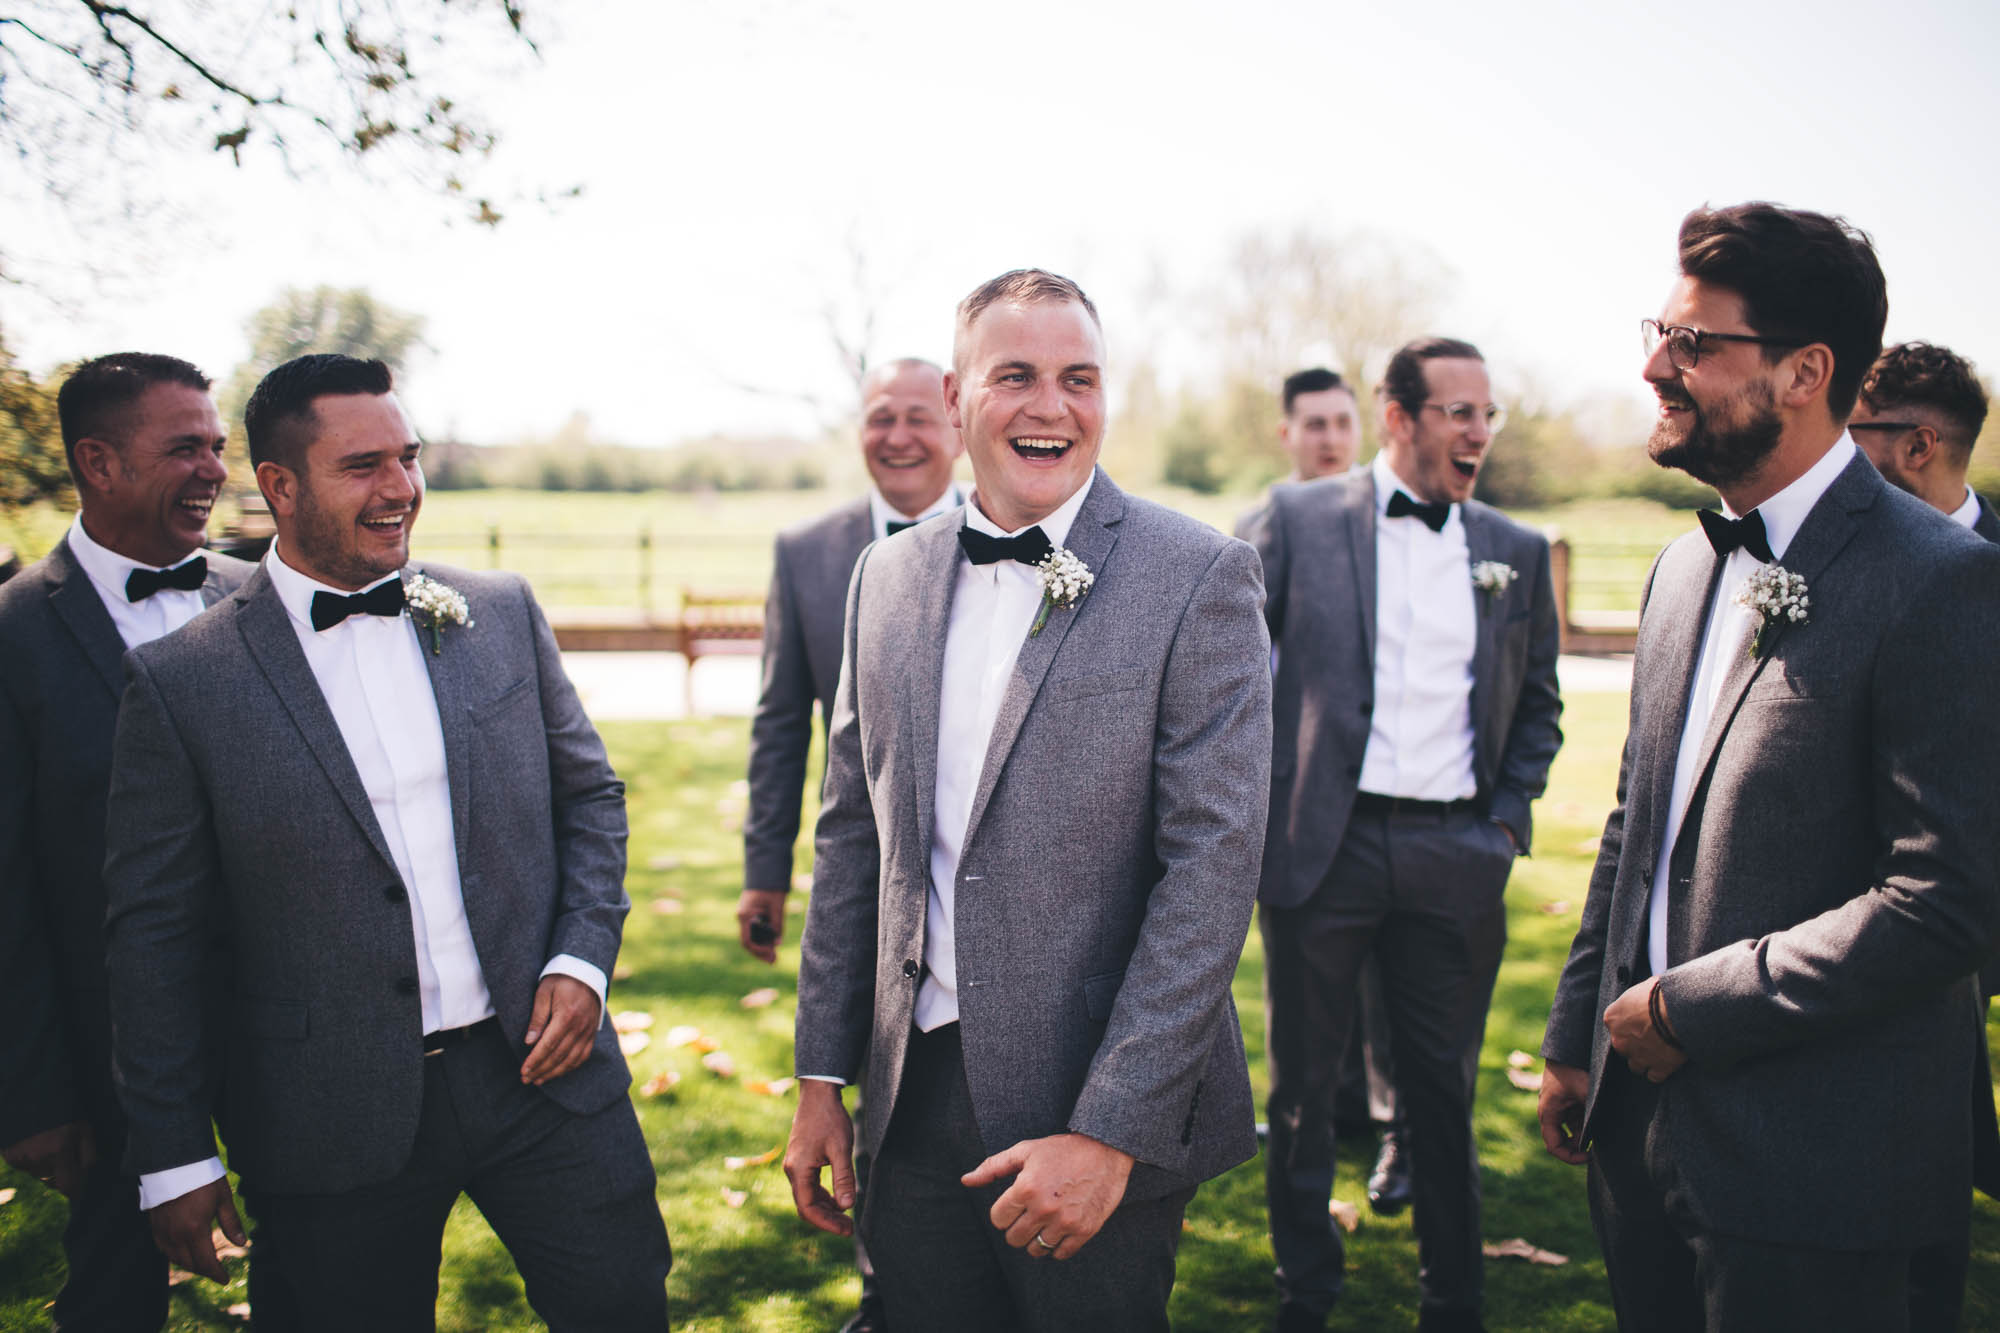 Groomsmen share a joke with each other